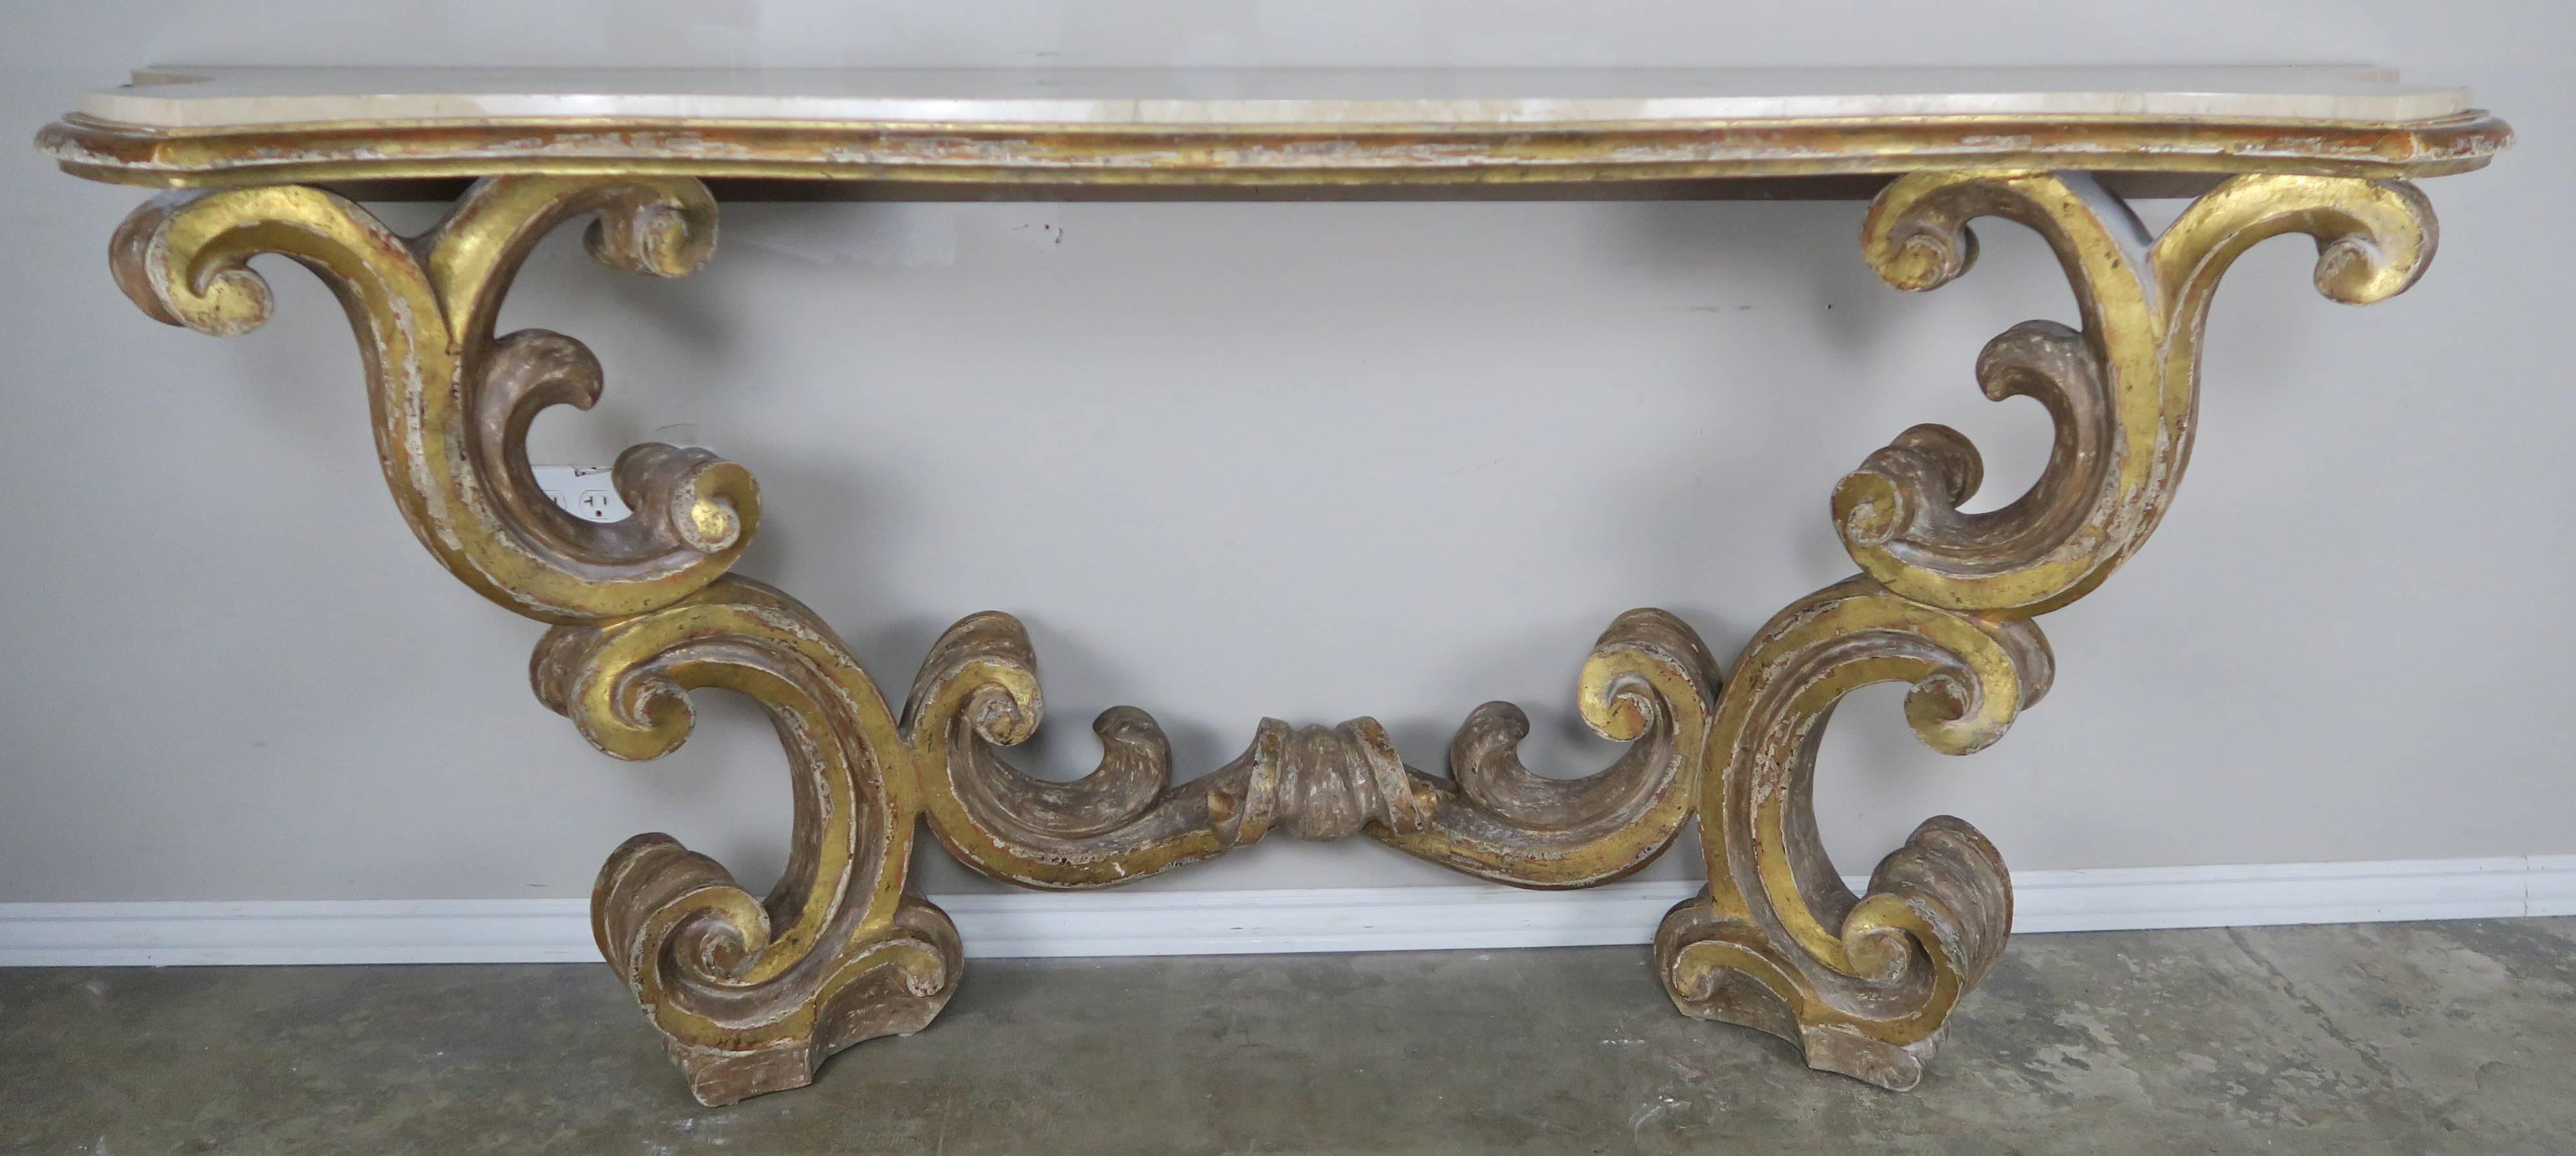 Rococo Italian Scrolled Giltwood Marble-Top Carved Console